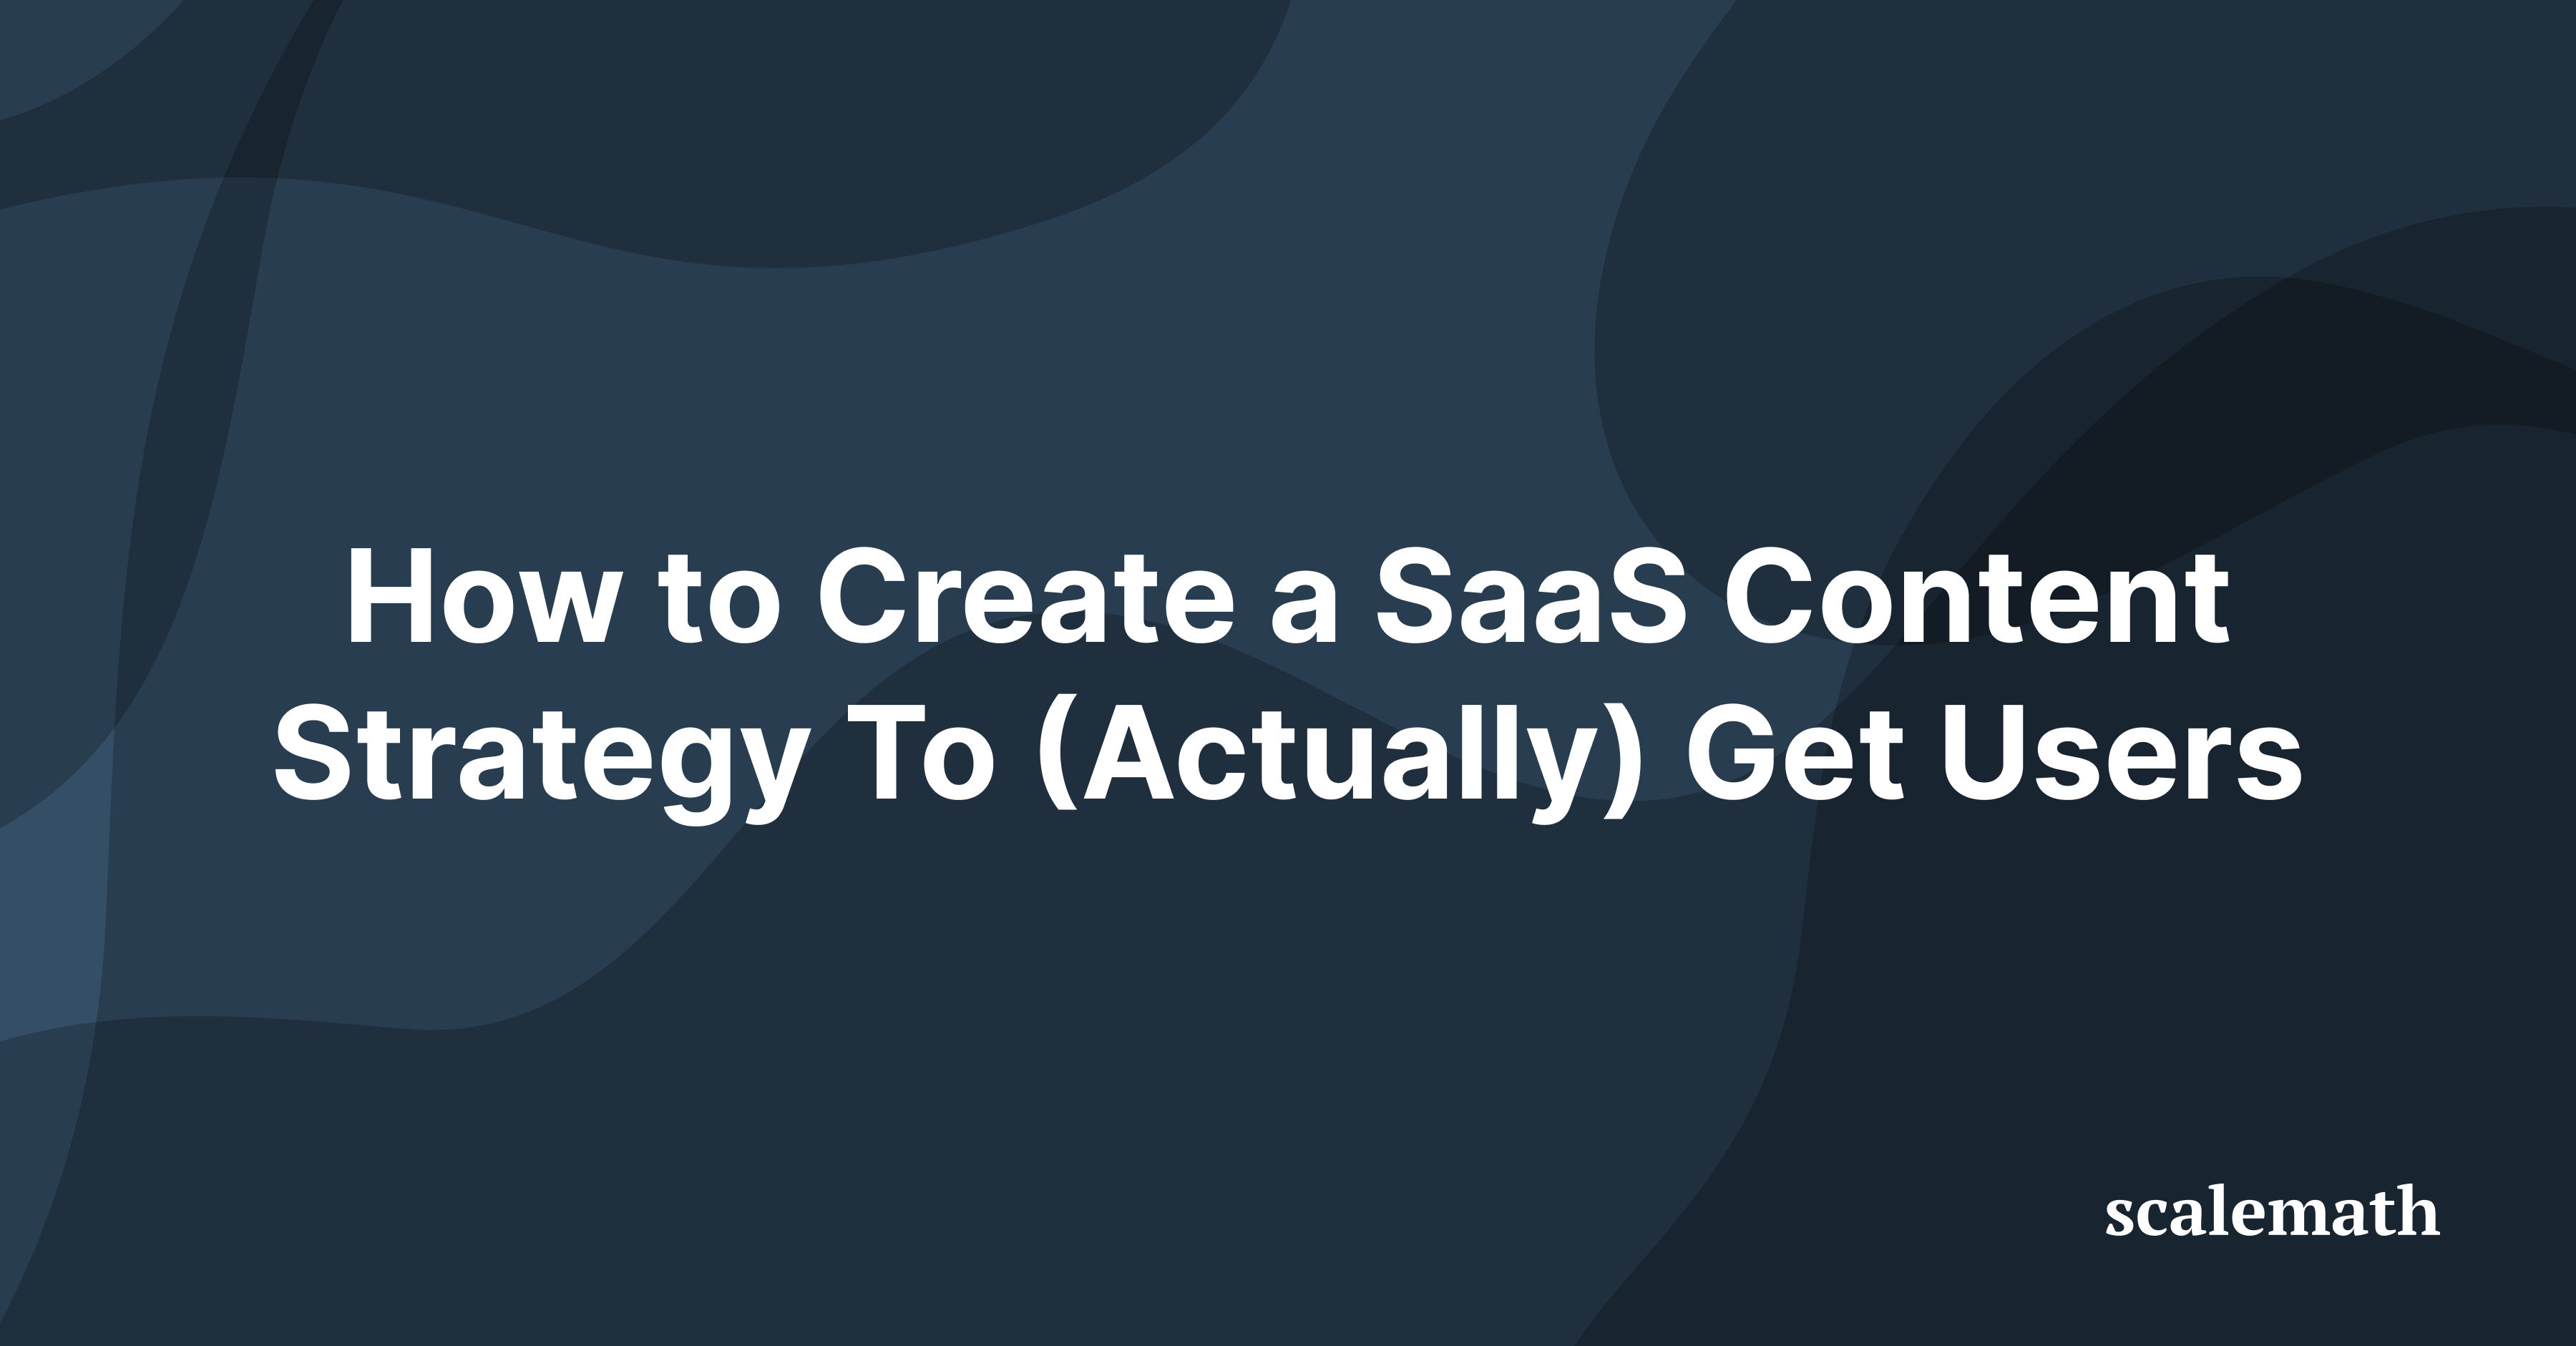 SaaS Content Strategy